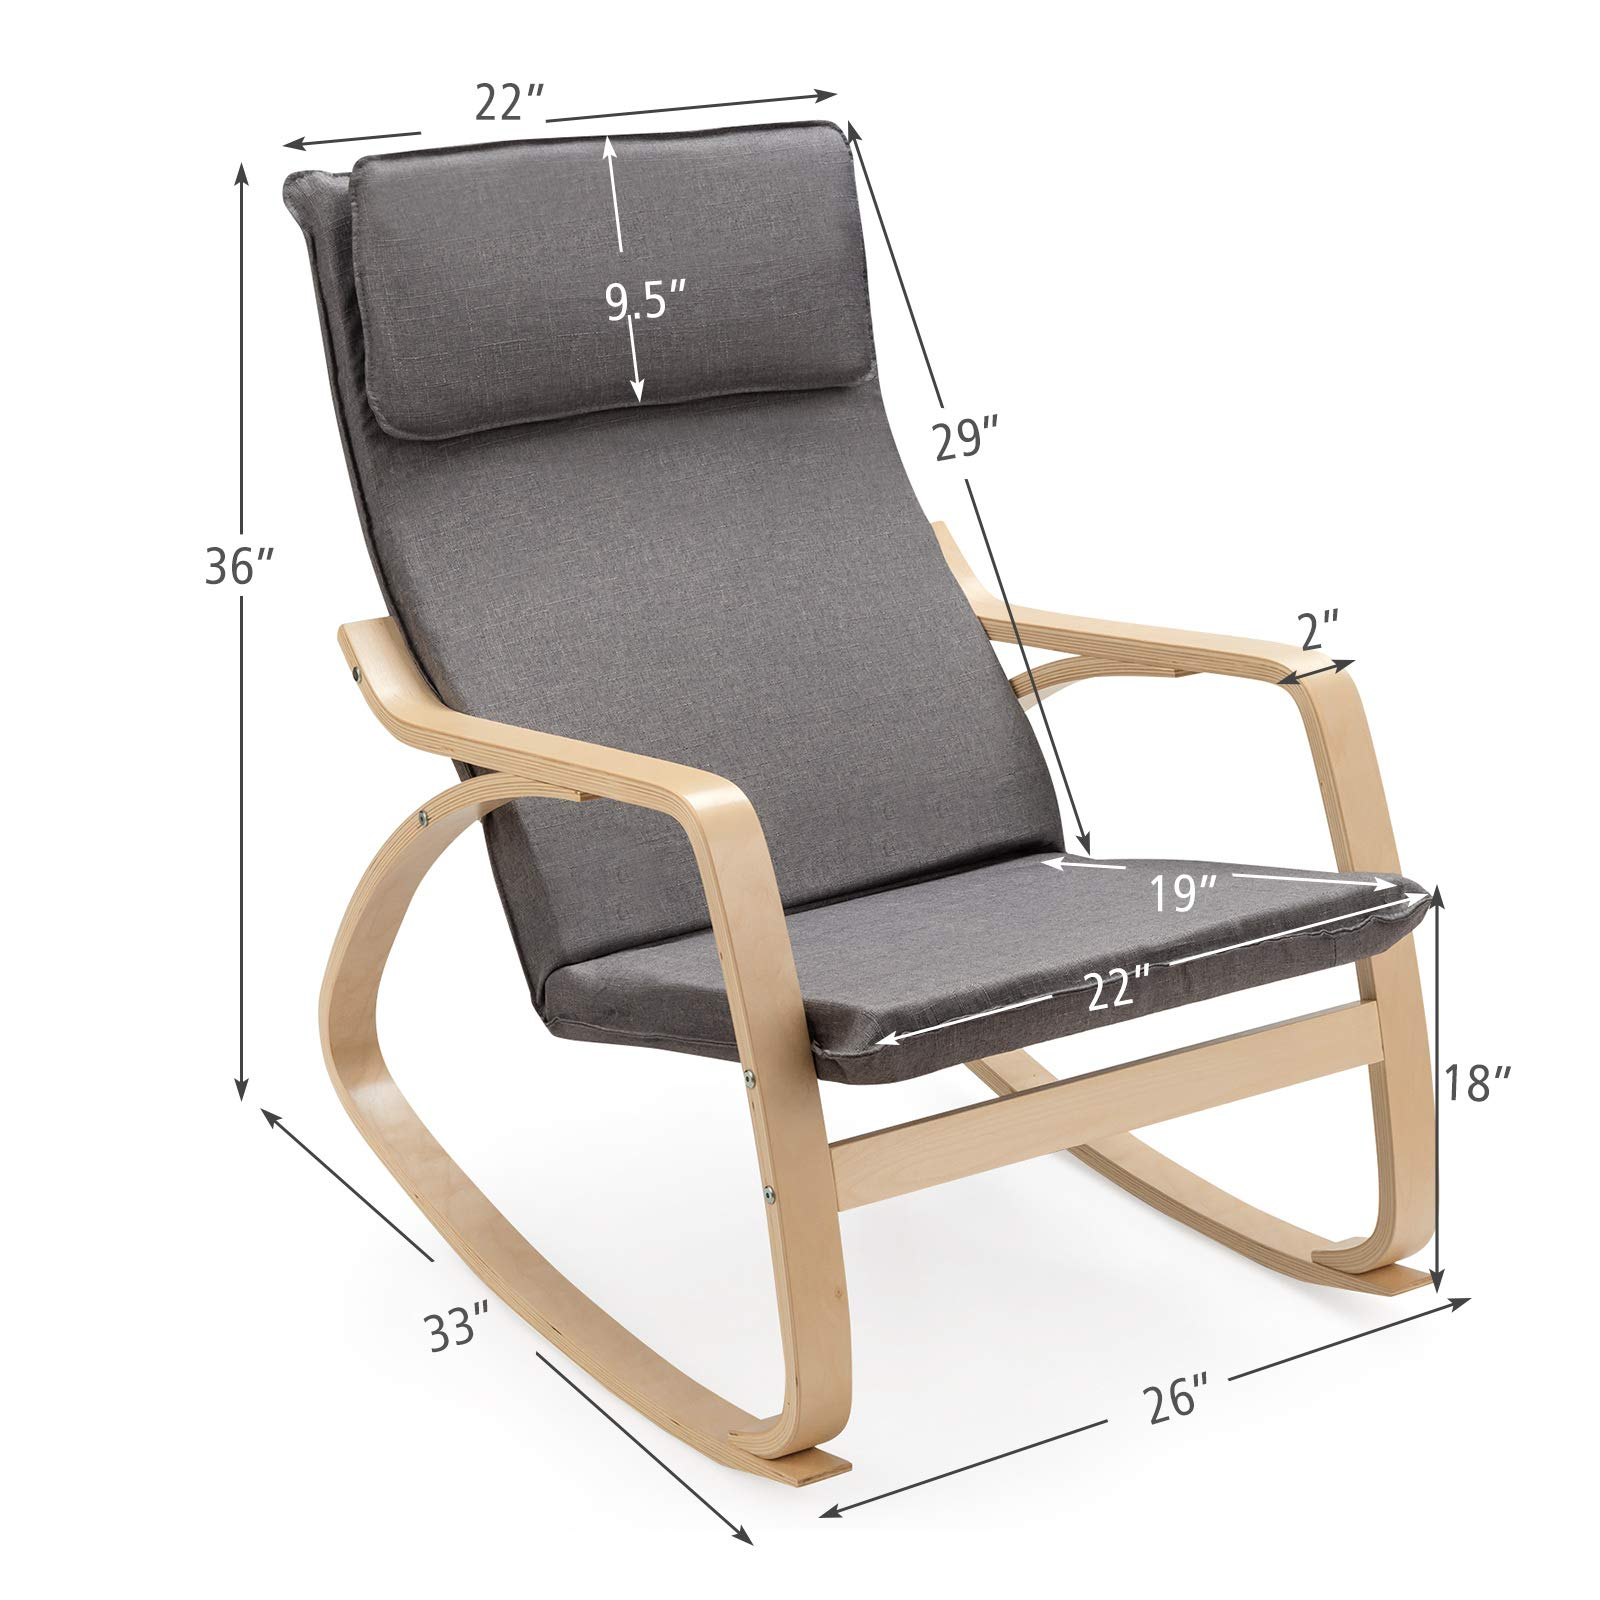 Giantex Stable Wooden Frame Relaxing Modern Leisure Armchair Suitable for Living Room, Bedroom, Balcony, Nursery Room